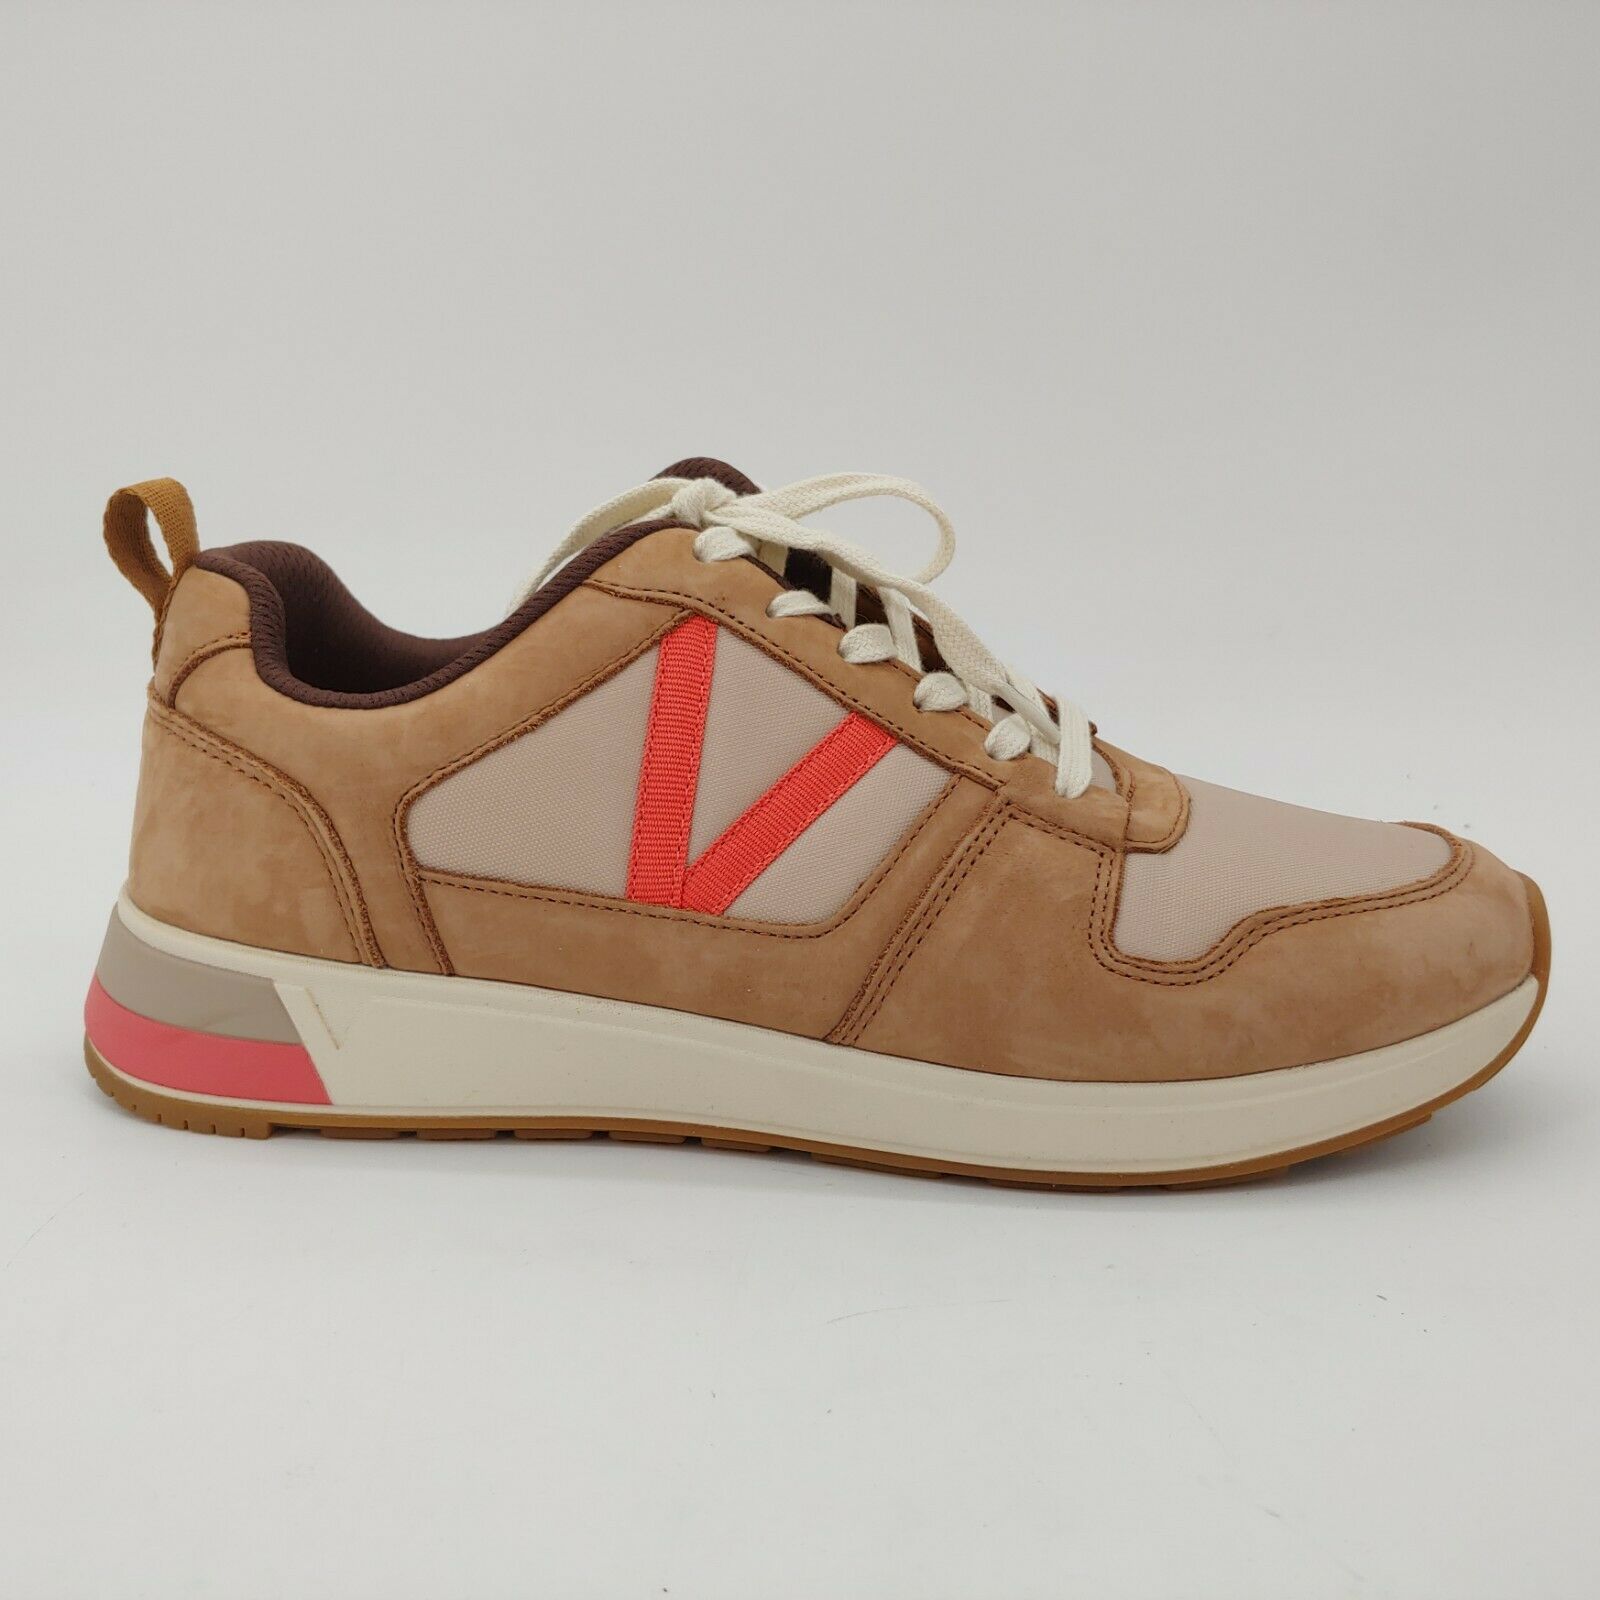 Vionic Womens Curran Rechelle Nylon Sneakers Shoes Toffee Pink Low Top 8.5M